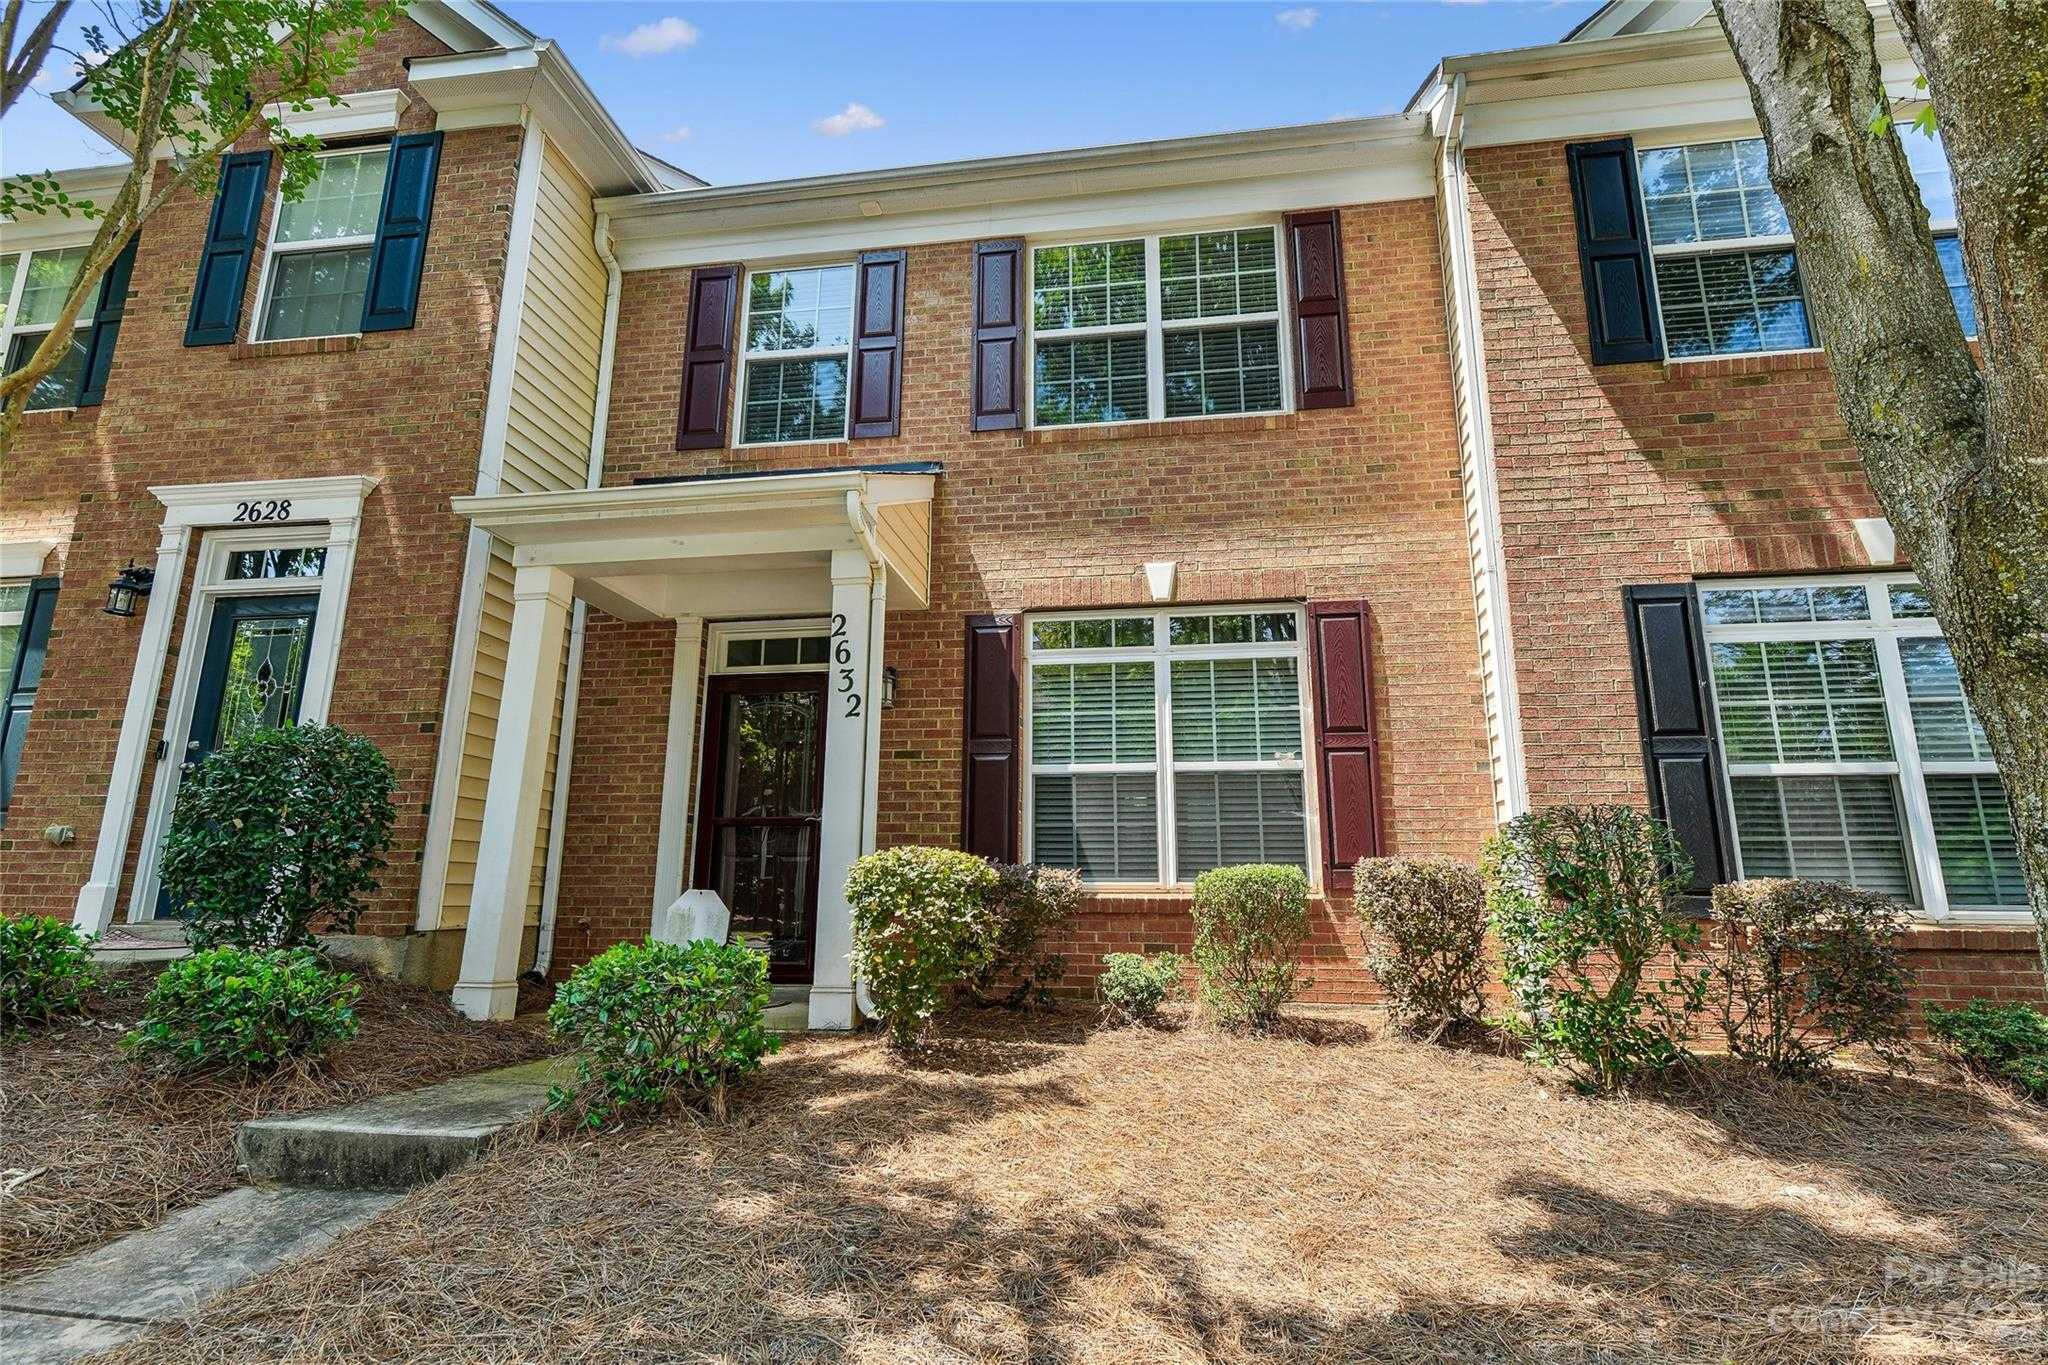 View Indian Land, SC 29707 townhome